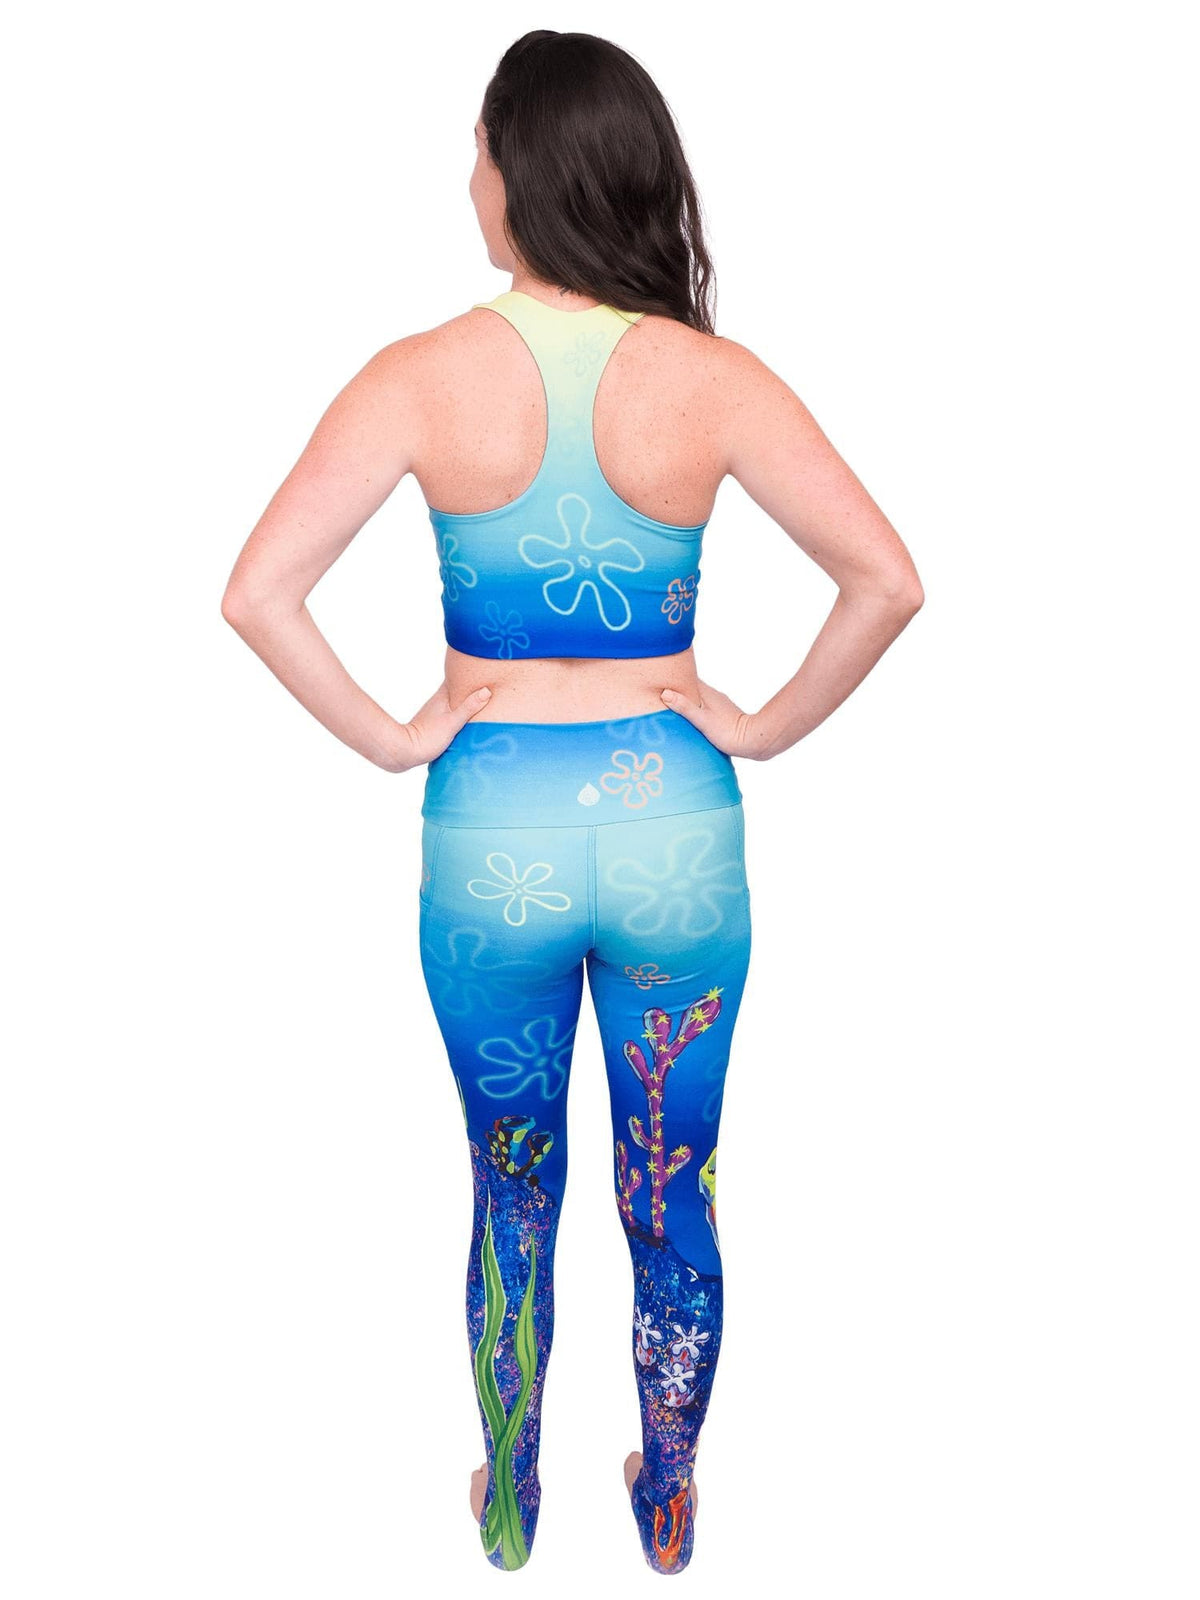 Model: Maddie is the Program &amp; Outreach Director at Debris Free Oceans and a restoration ecology educator. She is 5’8”, 135lbs, and wearing a size M legging and top.